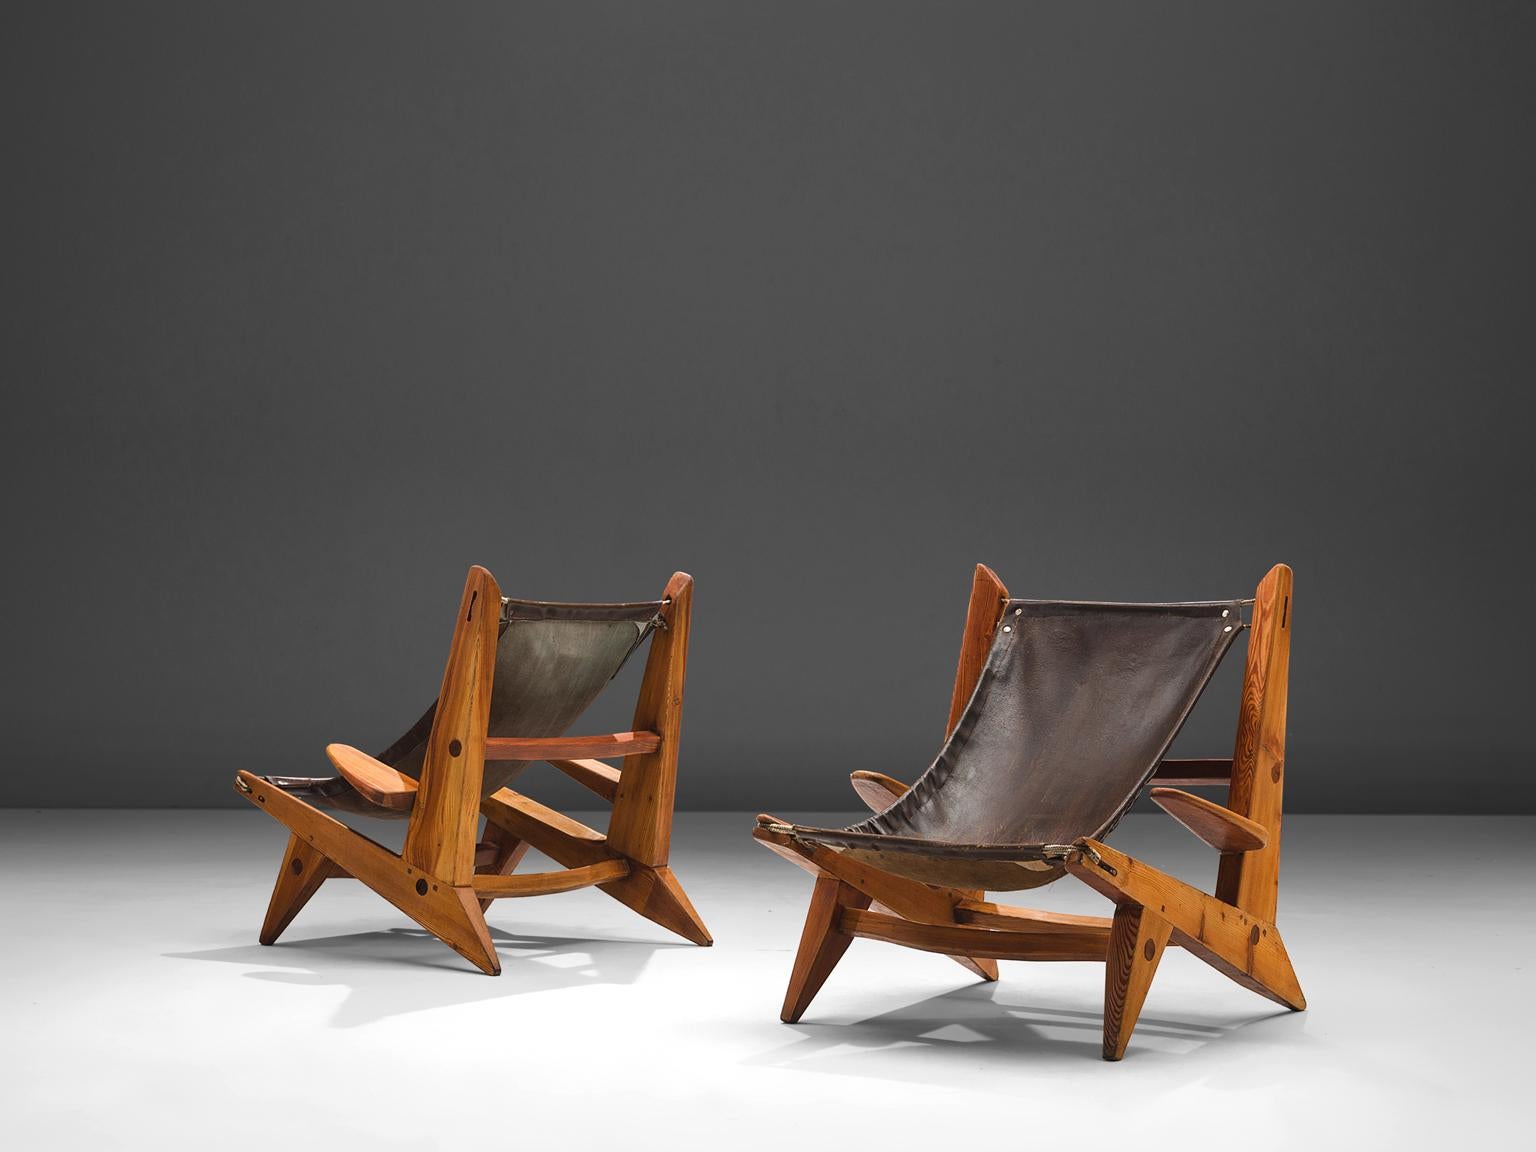 Hunting easy chairs, leather, pine, France, 1950s.

This set of robust safari chairs features wonderful patinated leather on both seat and back. This patina creates a vibrant look. The chairs are sculptural and chunky and will fit perfect in a